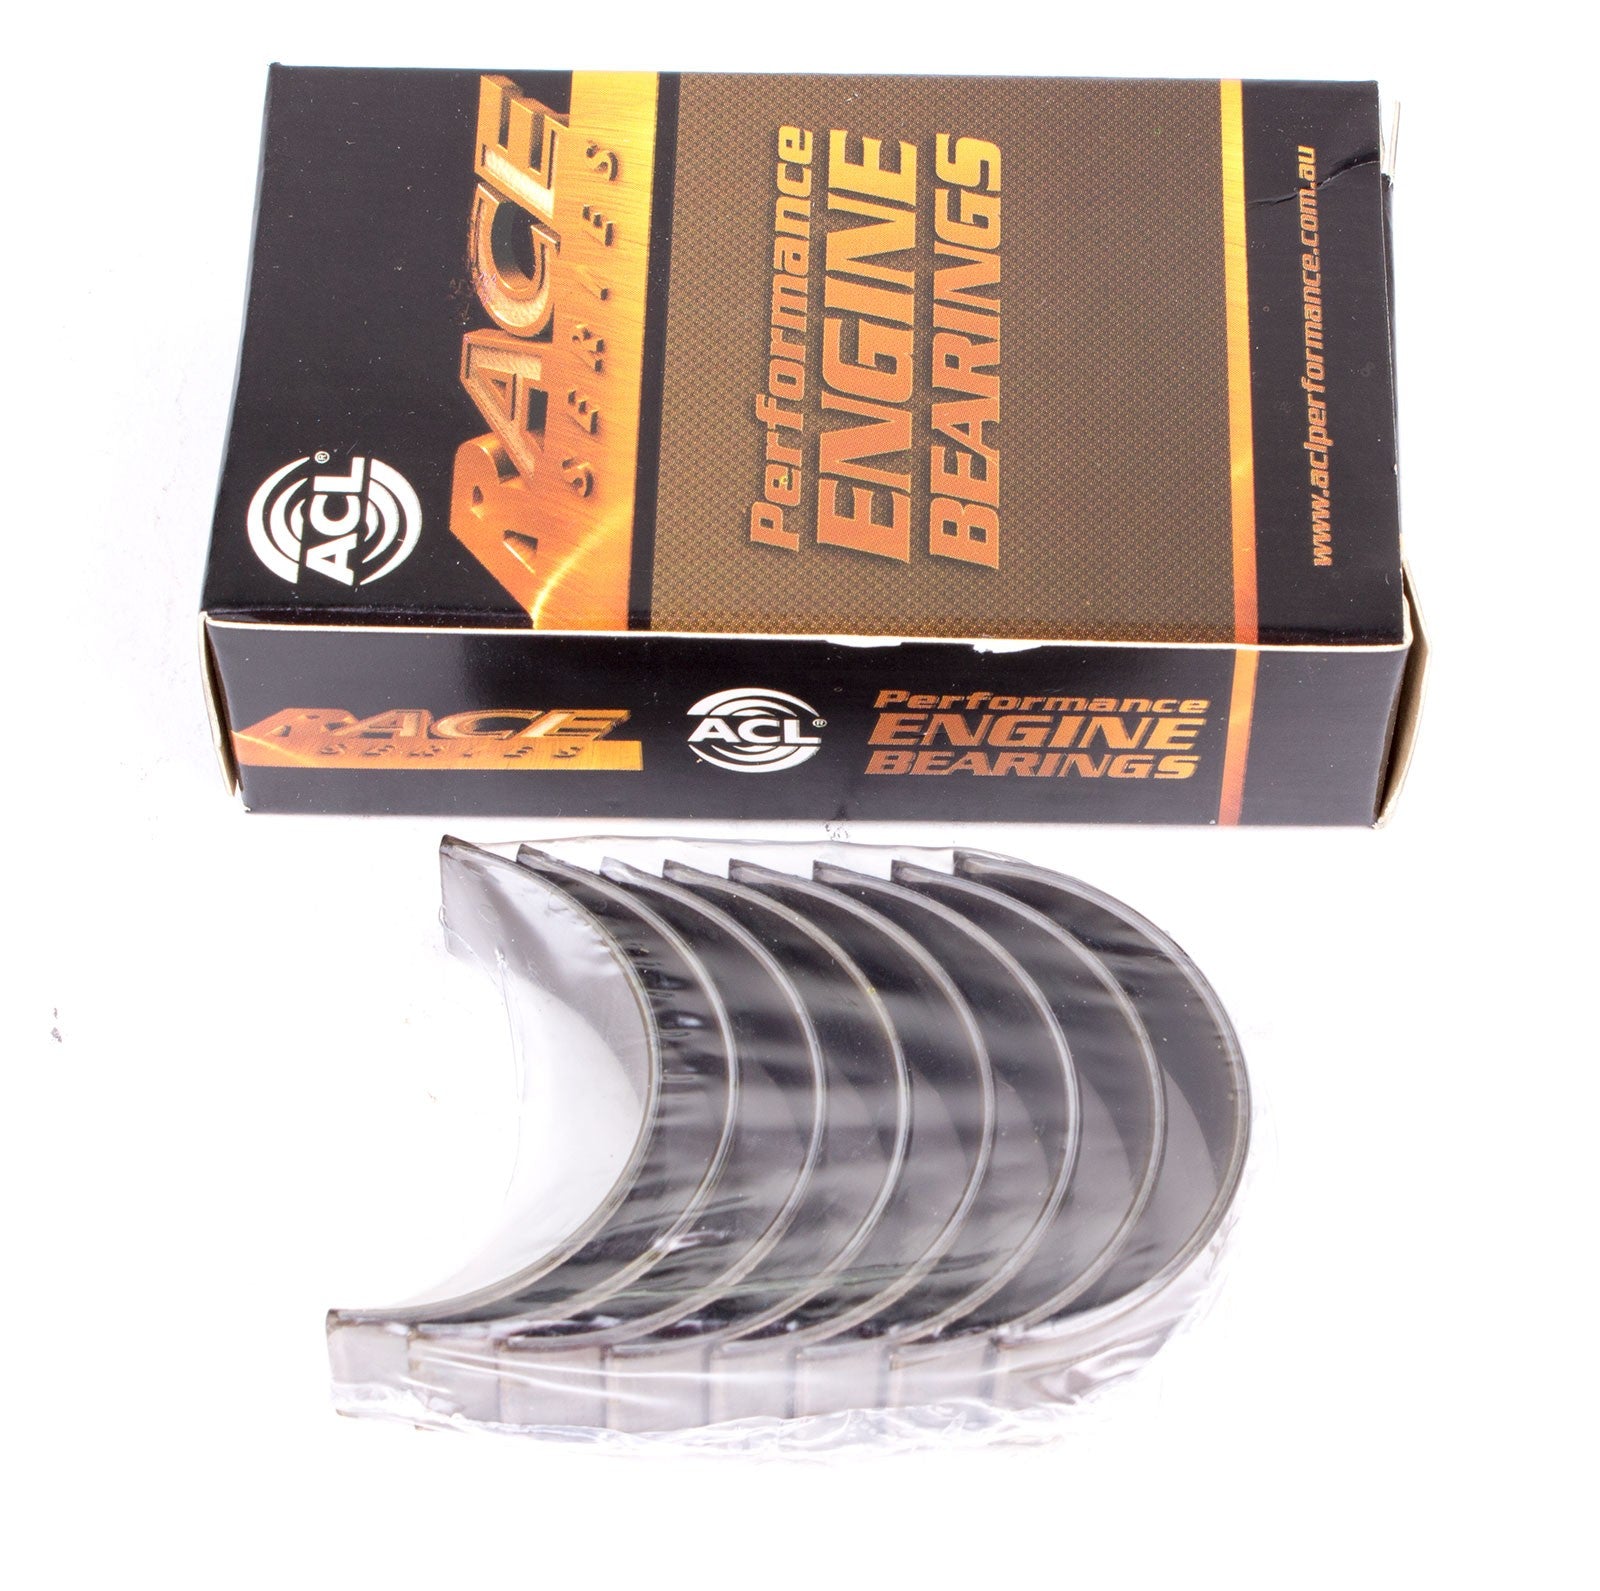 ACL 5M590H-10 Main bearing set (ACL Race Series) Photo-0 